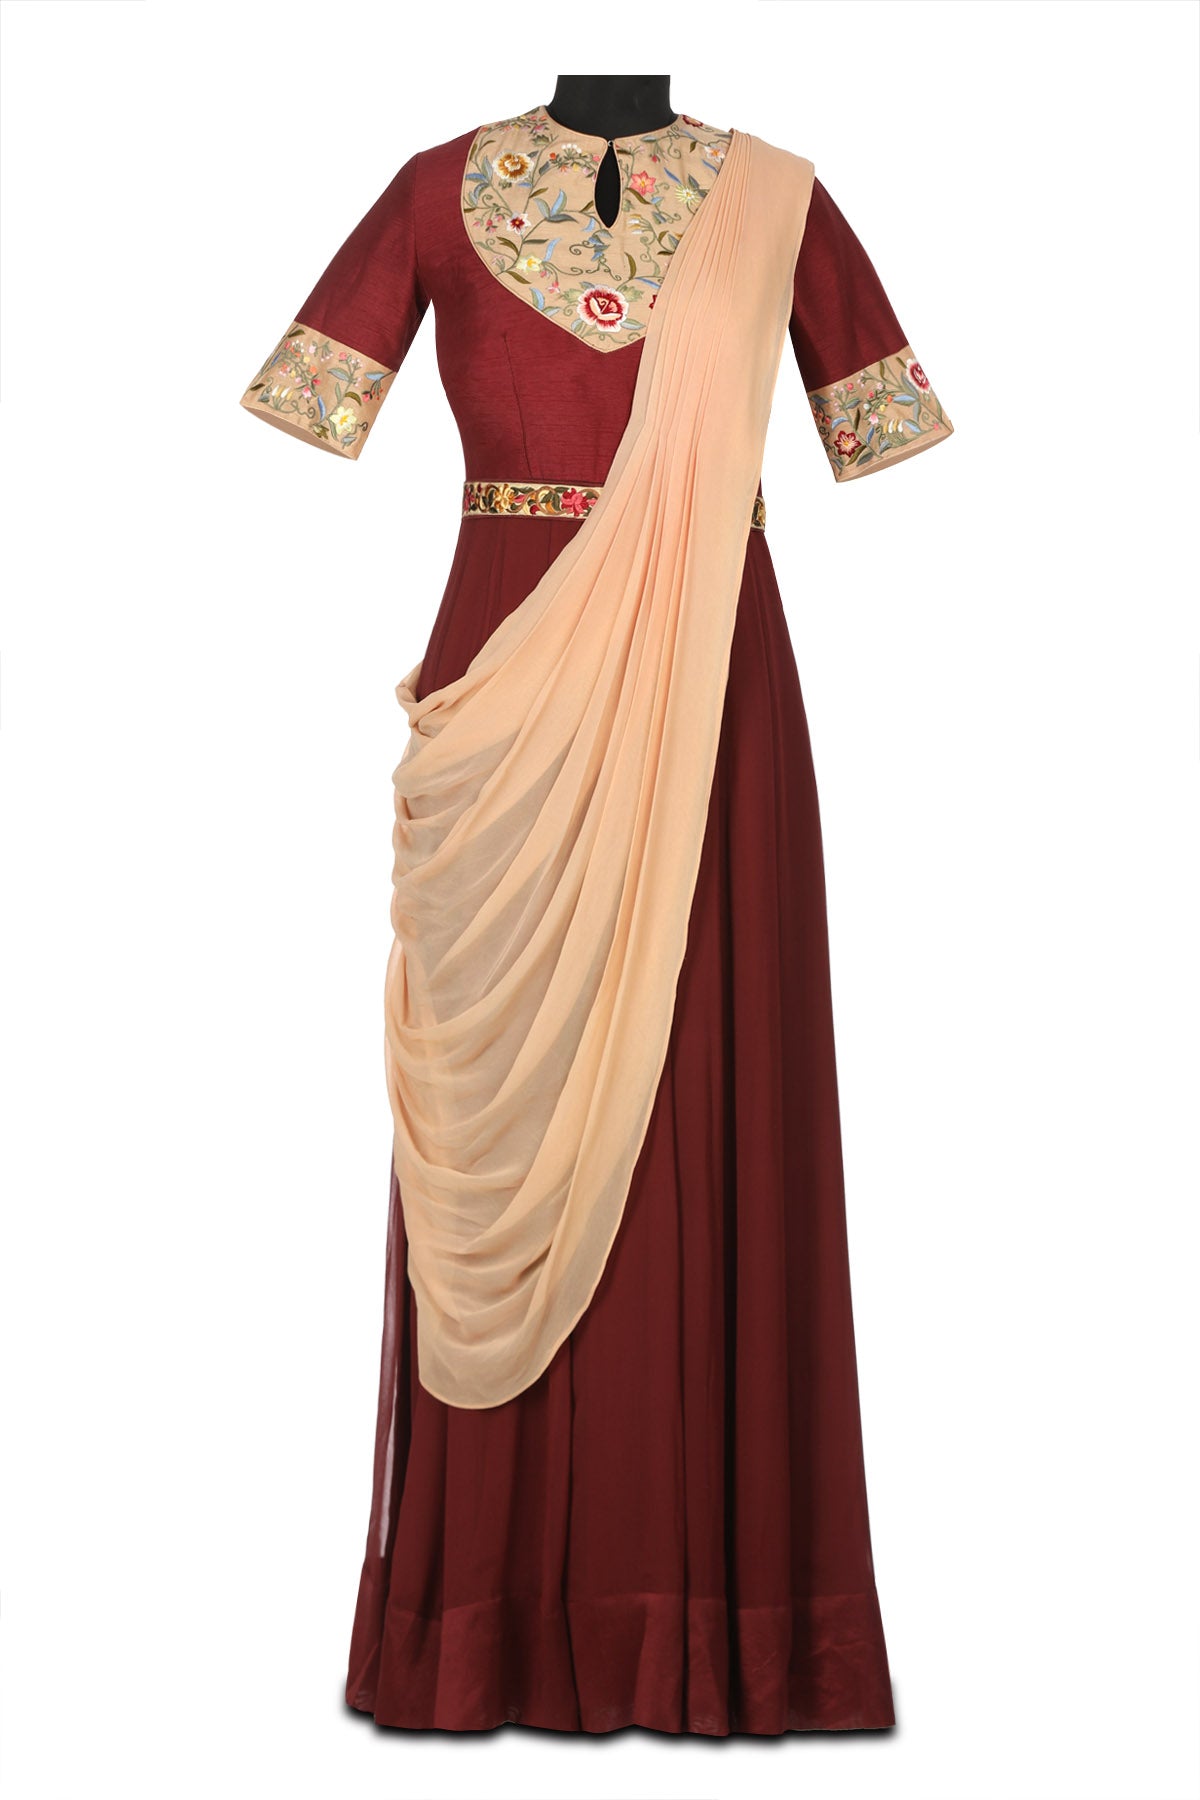 50Z180-RO Burgundy and Peach Georgette Anarkali with Parsi Embroidery